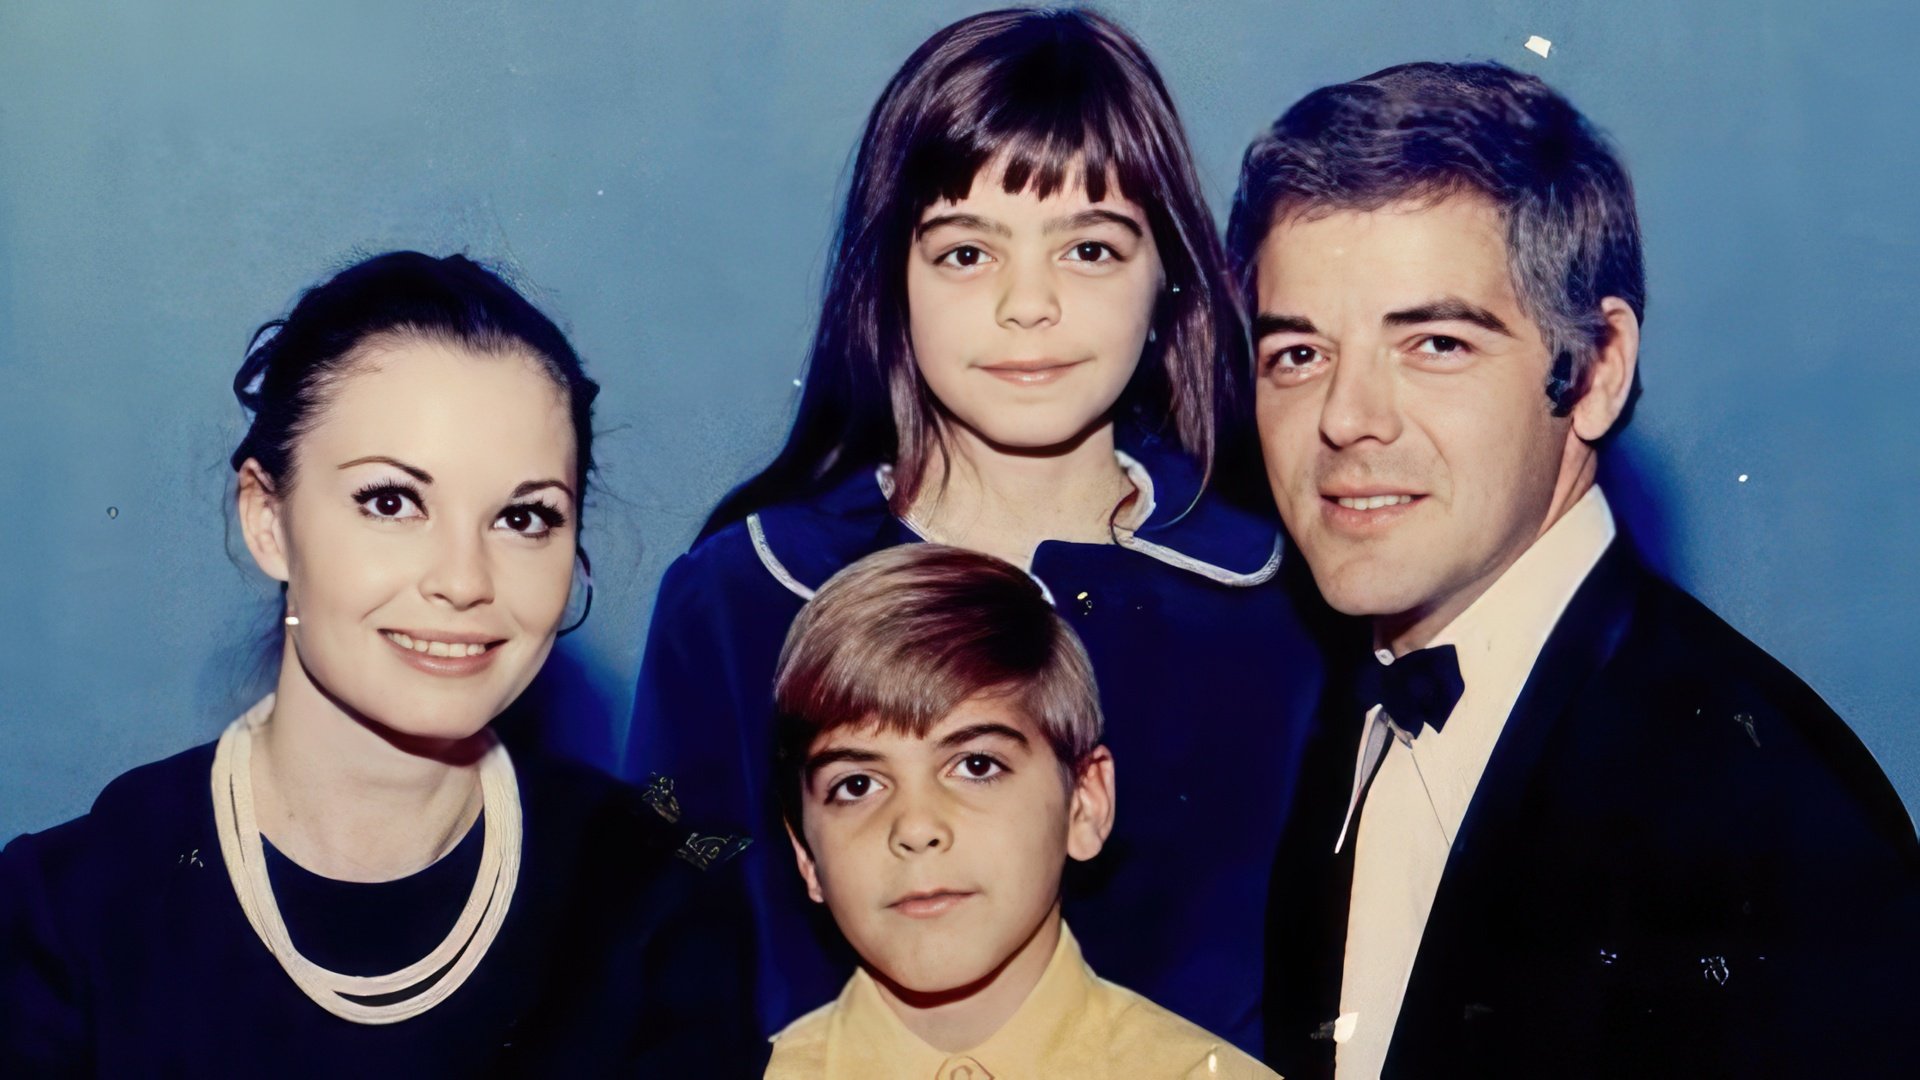 George Clooney and his family